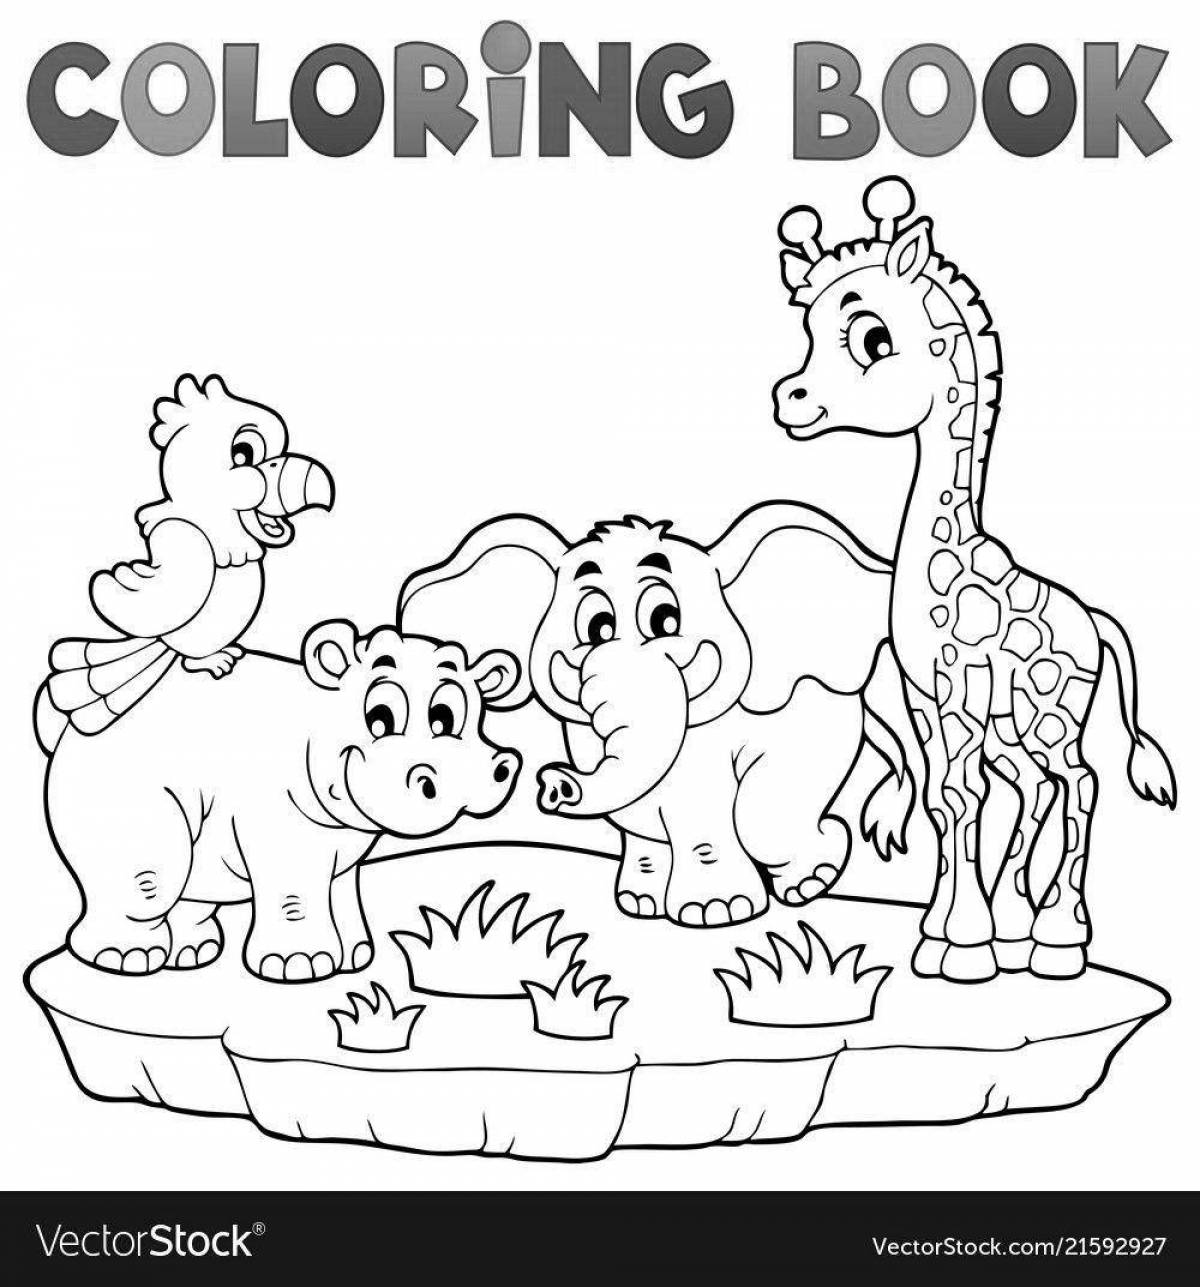 Colorful zoo coloring book for children 6-7 years old